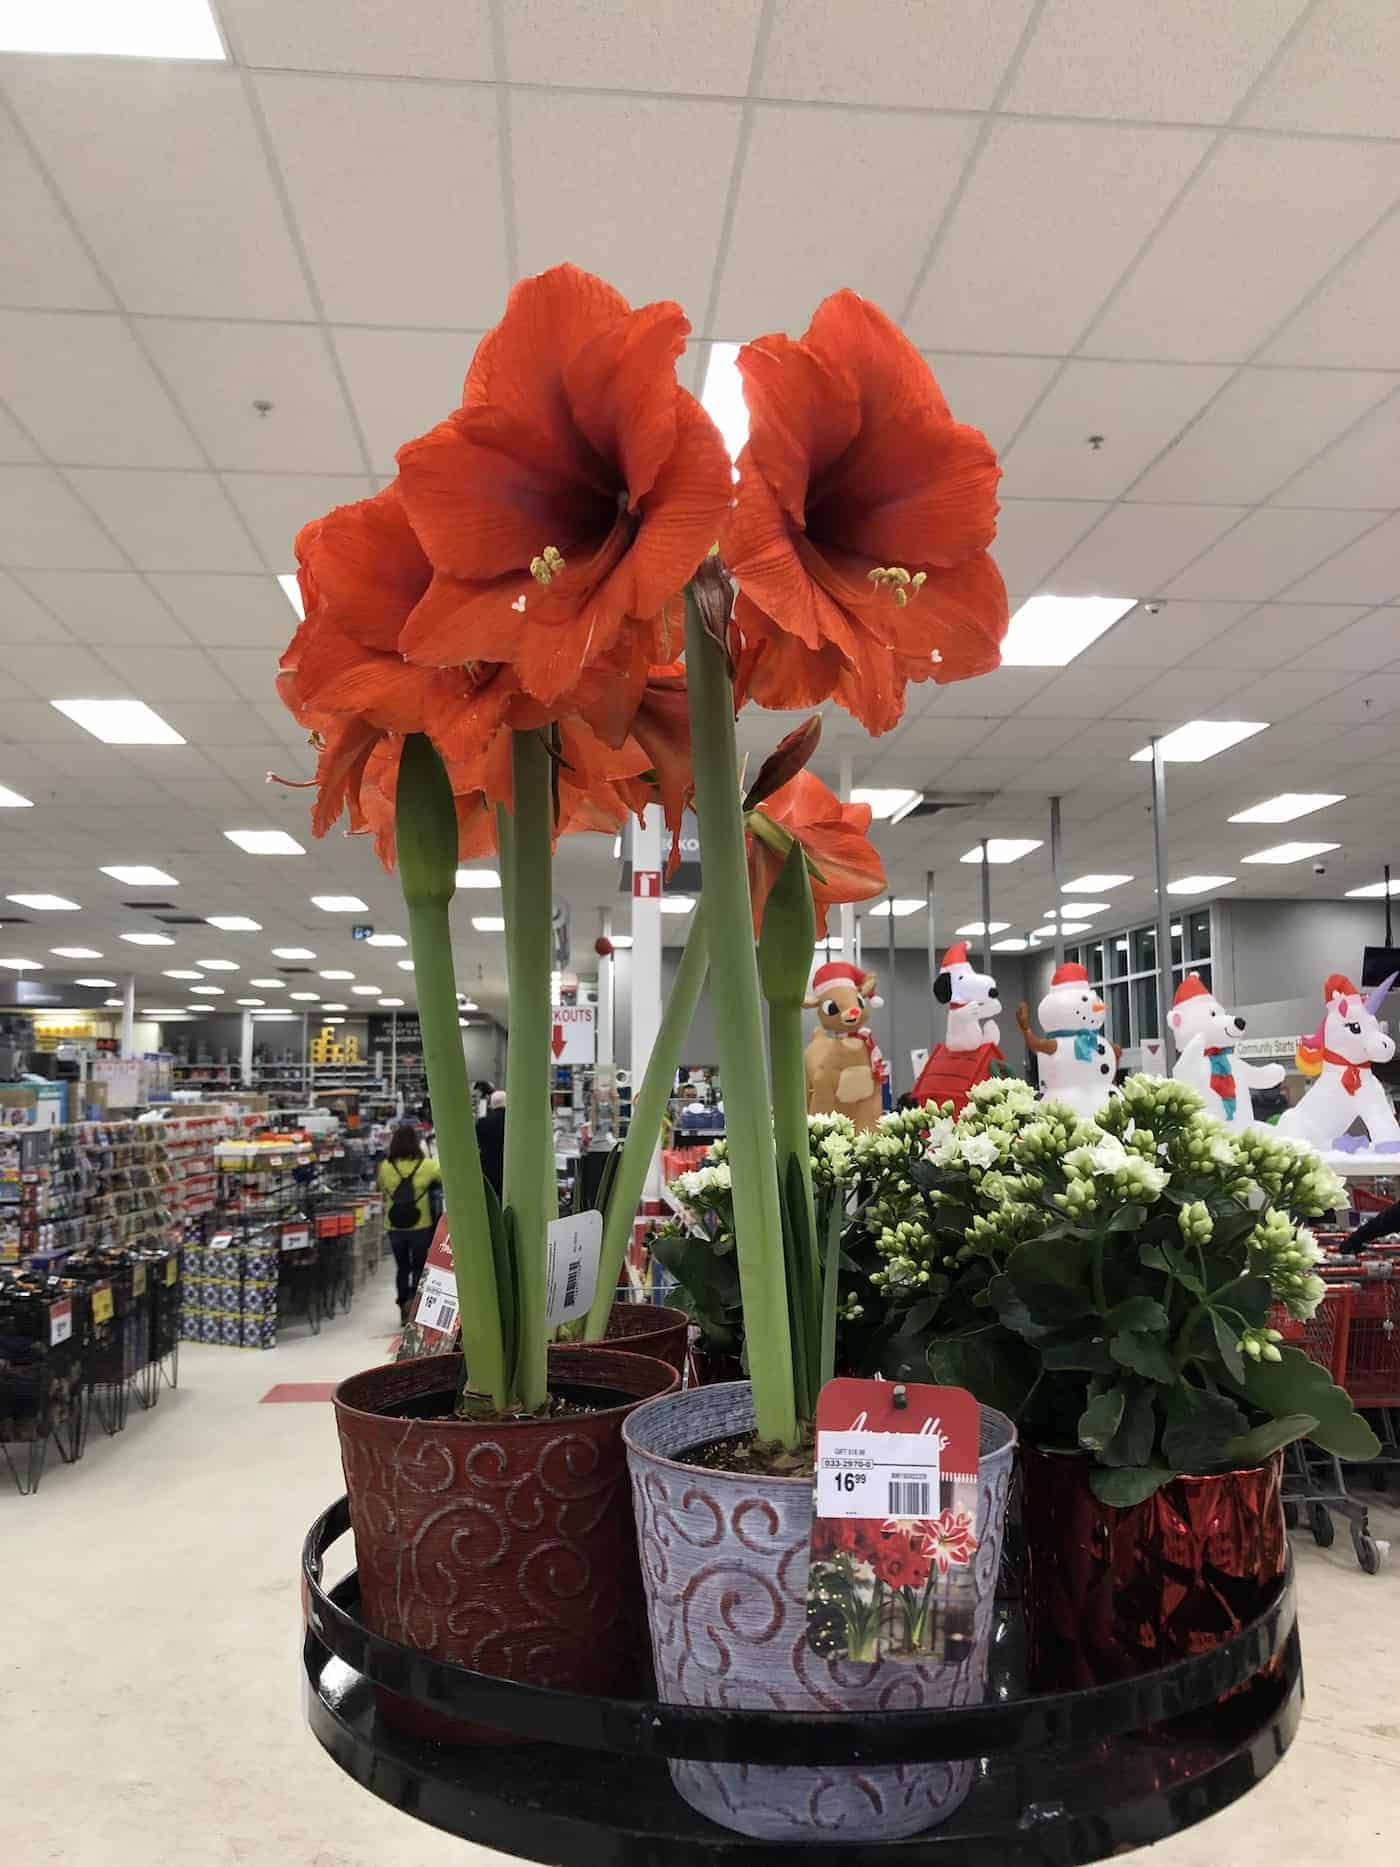 amaryllis blooming in a department store at Christmas